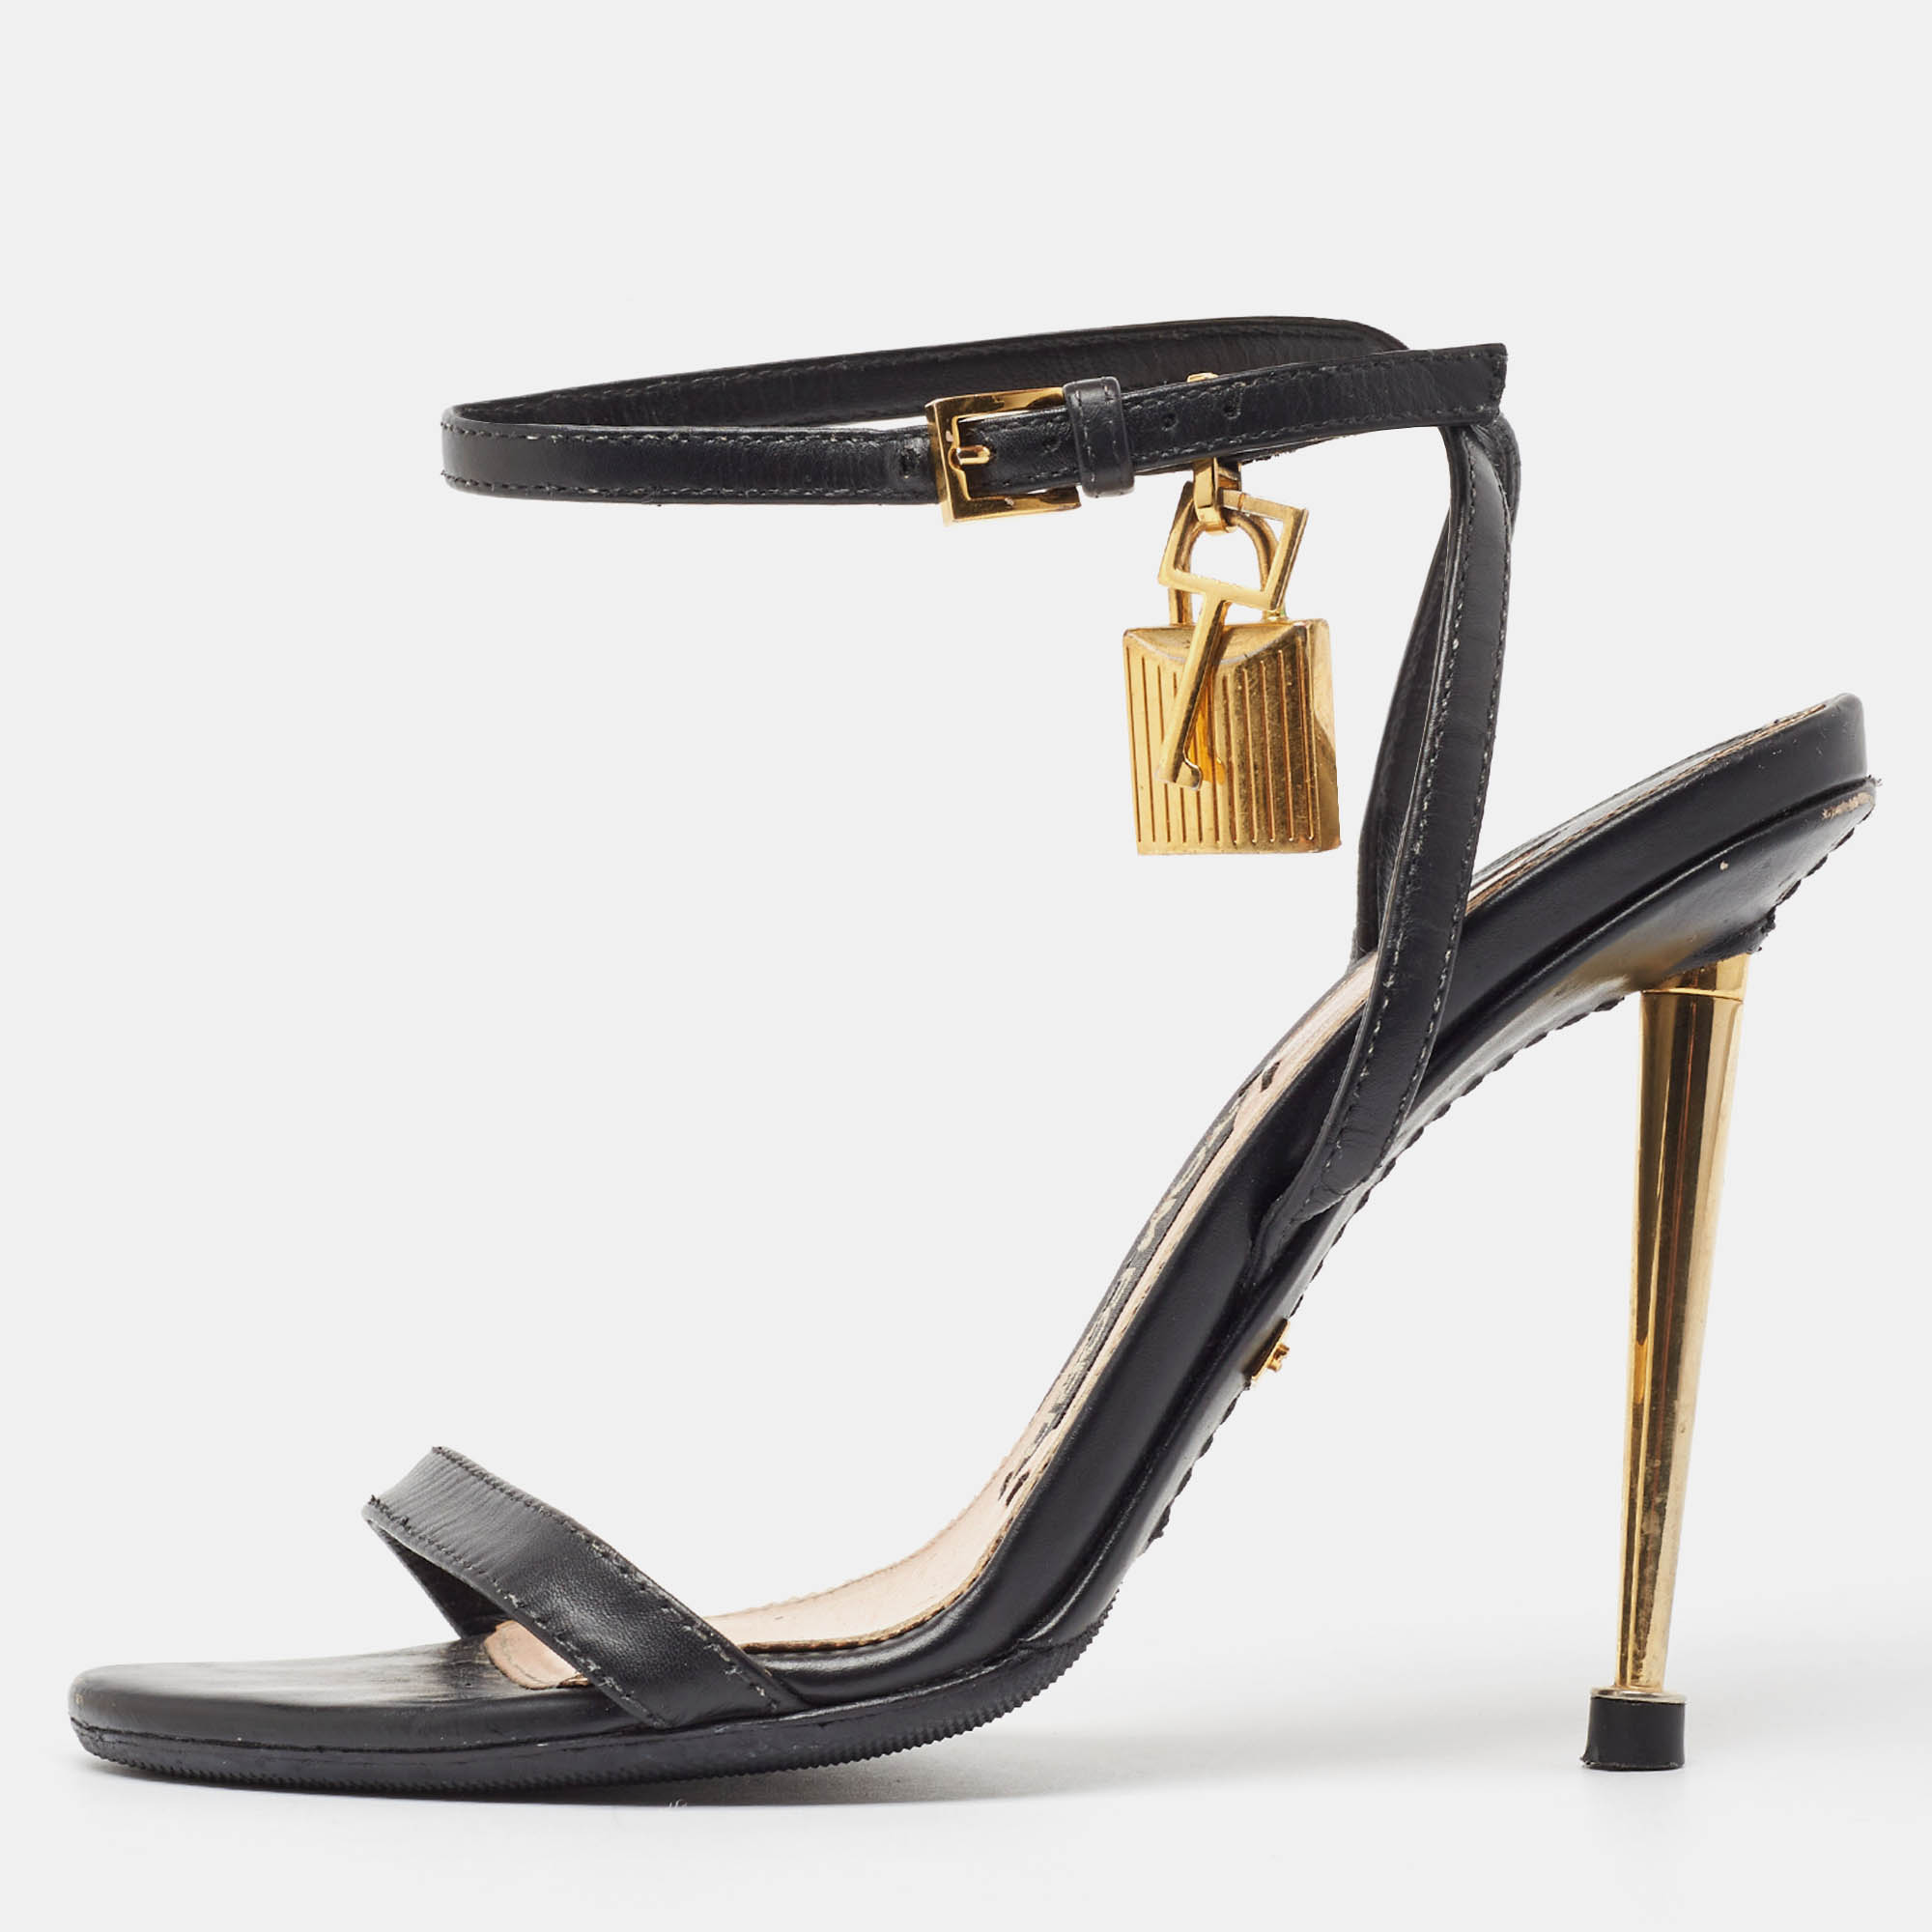 Tom ford black leather padlock ankle wrap sandals size 35